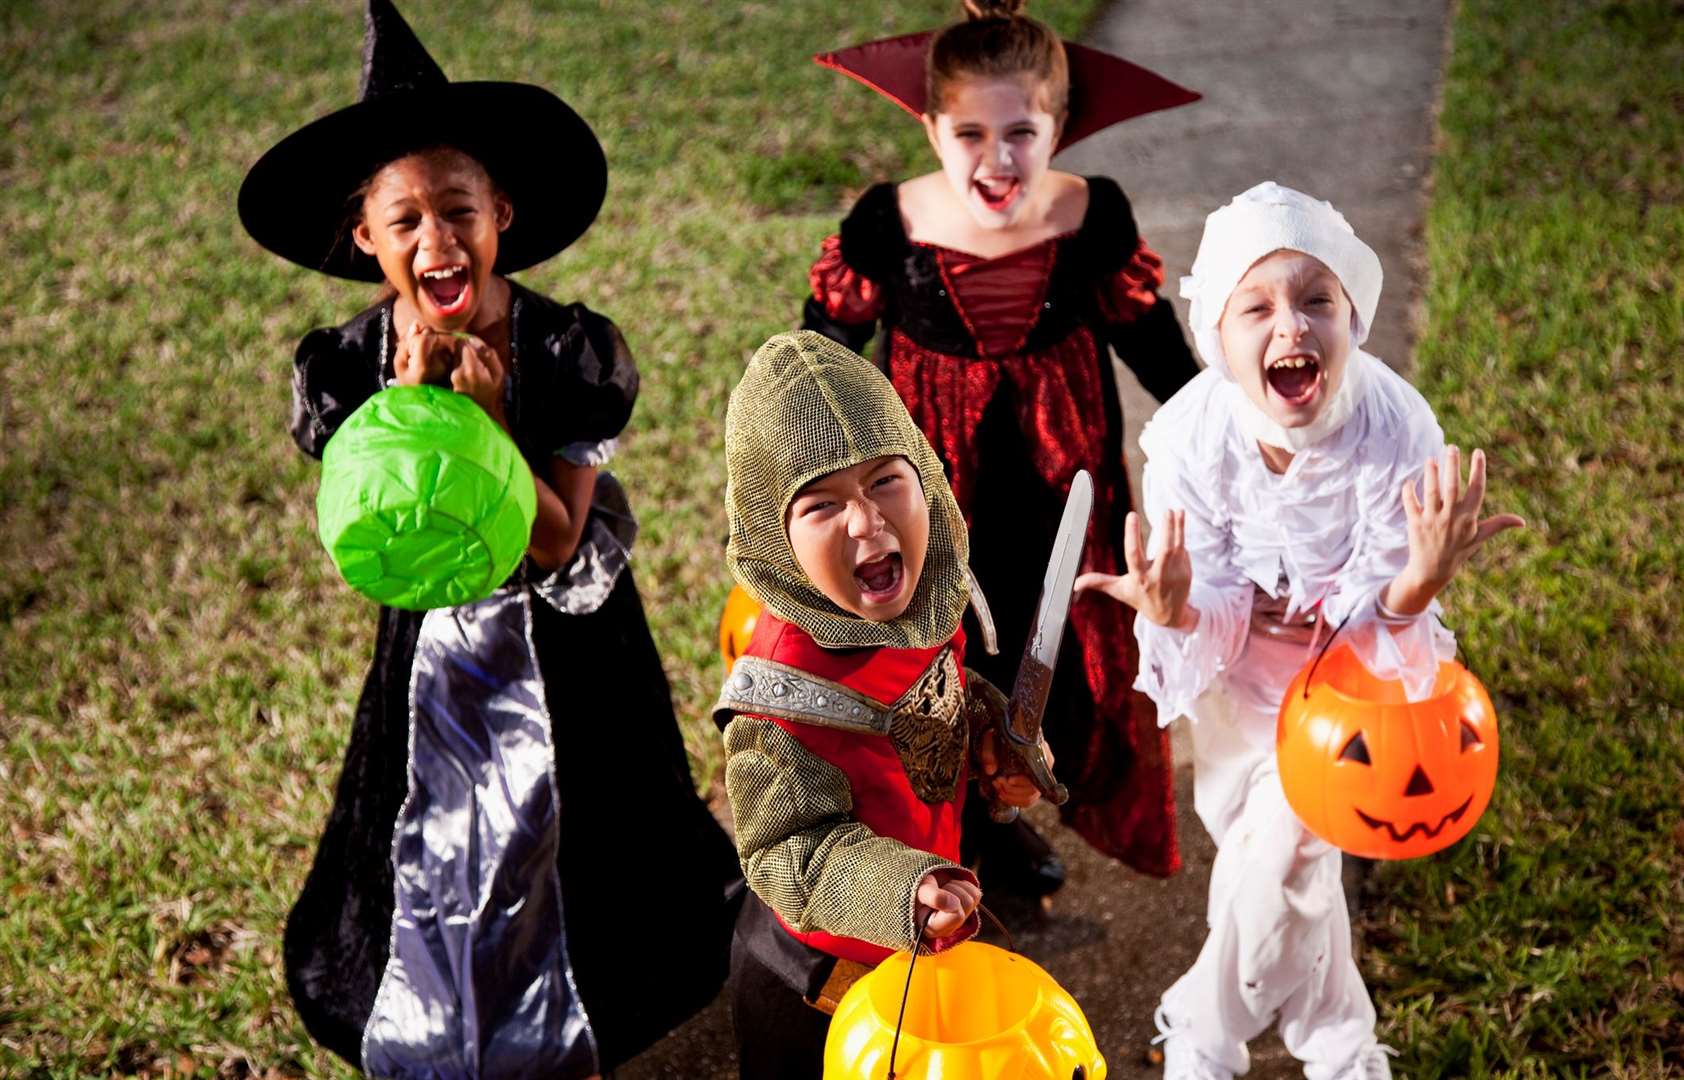 What are your dos and don'ts for Halloween? Image: iStock.